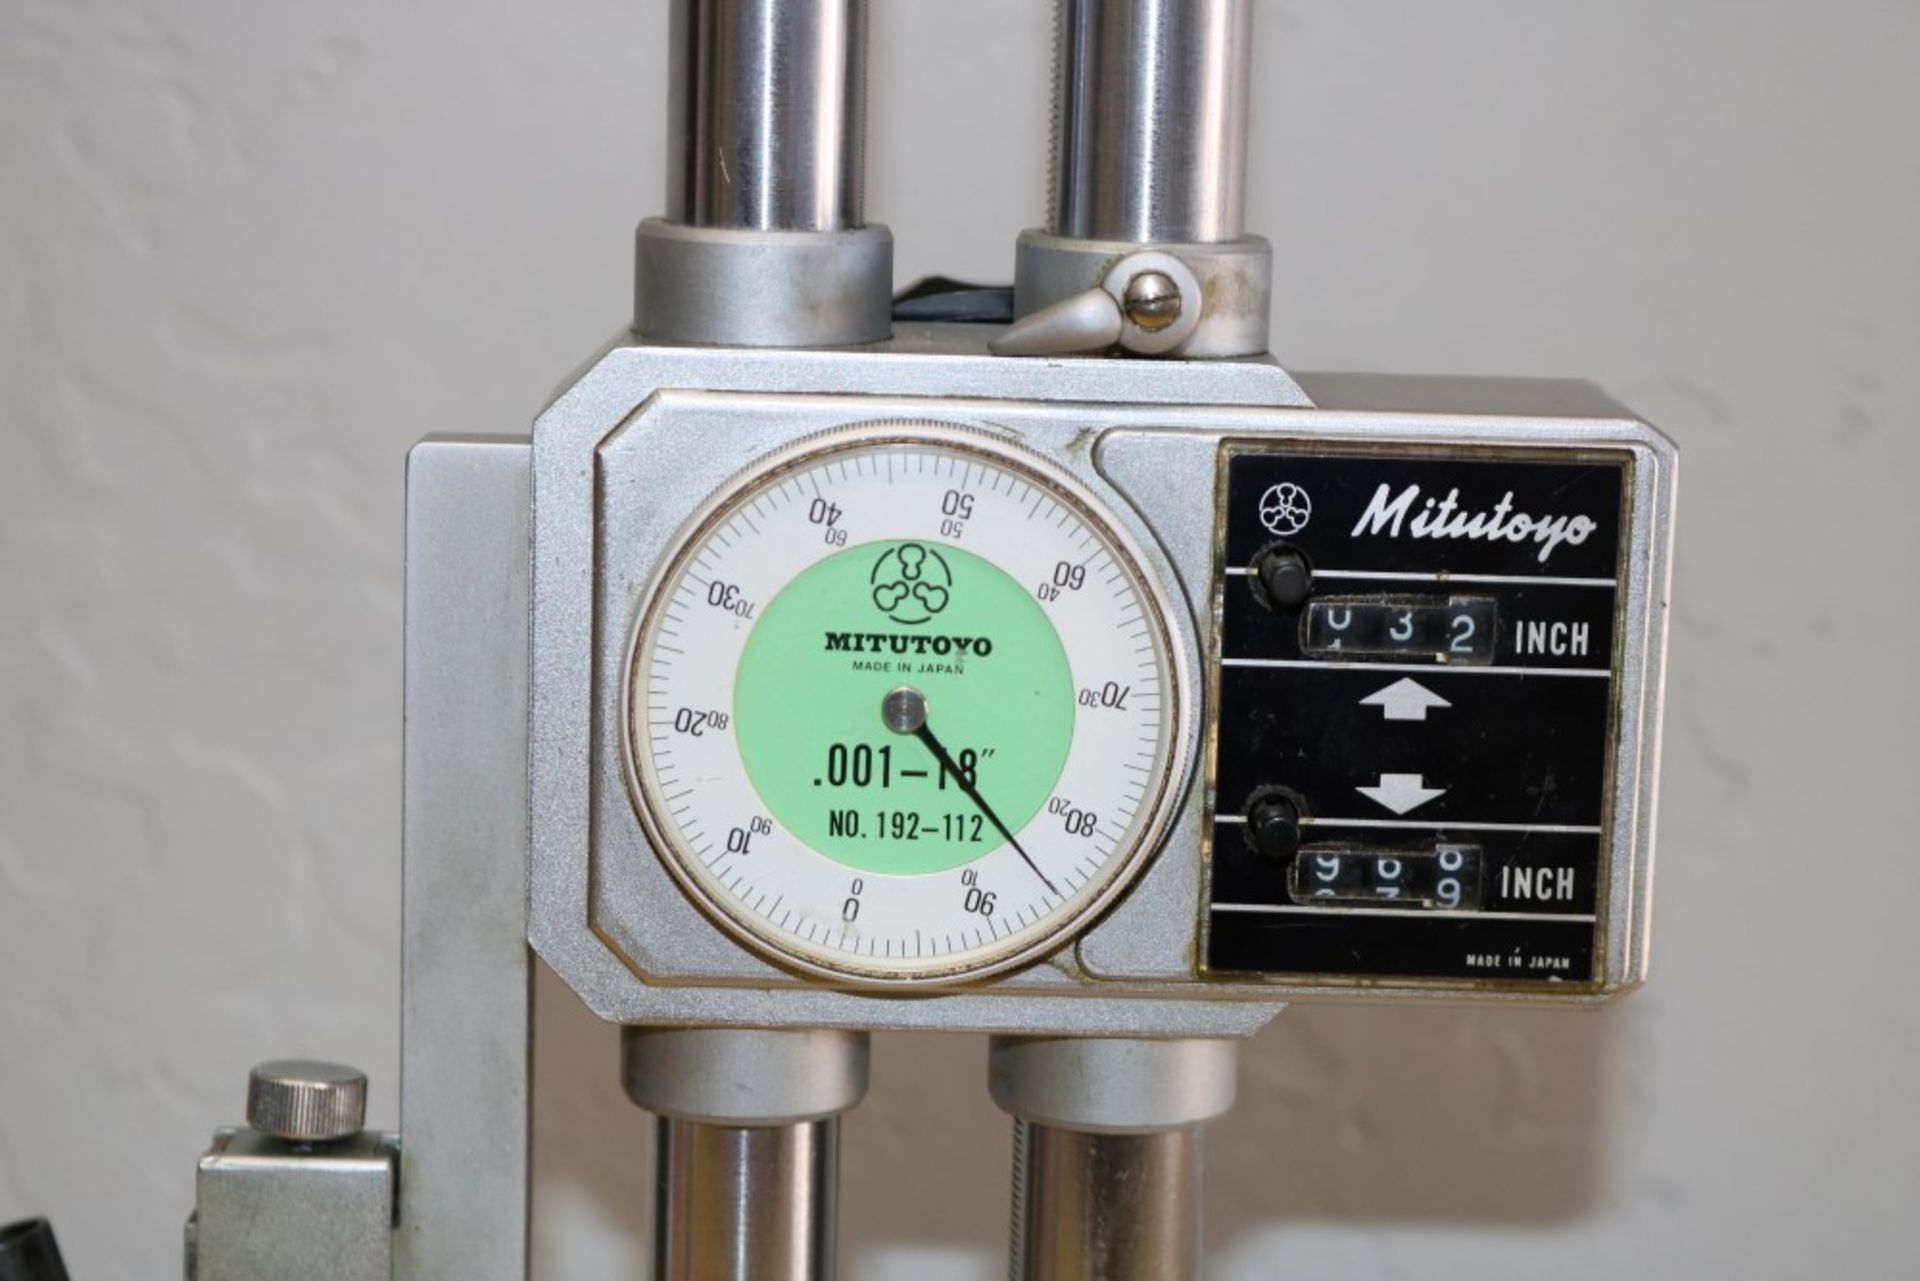 Mitutoyo Height Gage .001-18" with Borwn & Sharpe Dial Indicator - Image 3 of 5